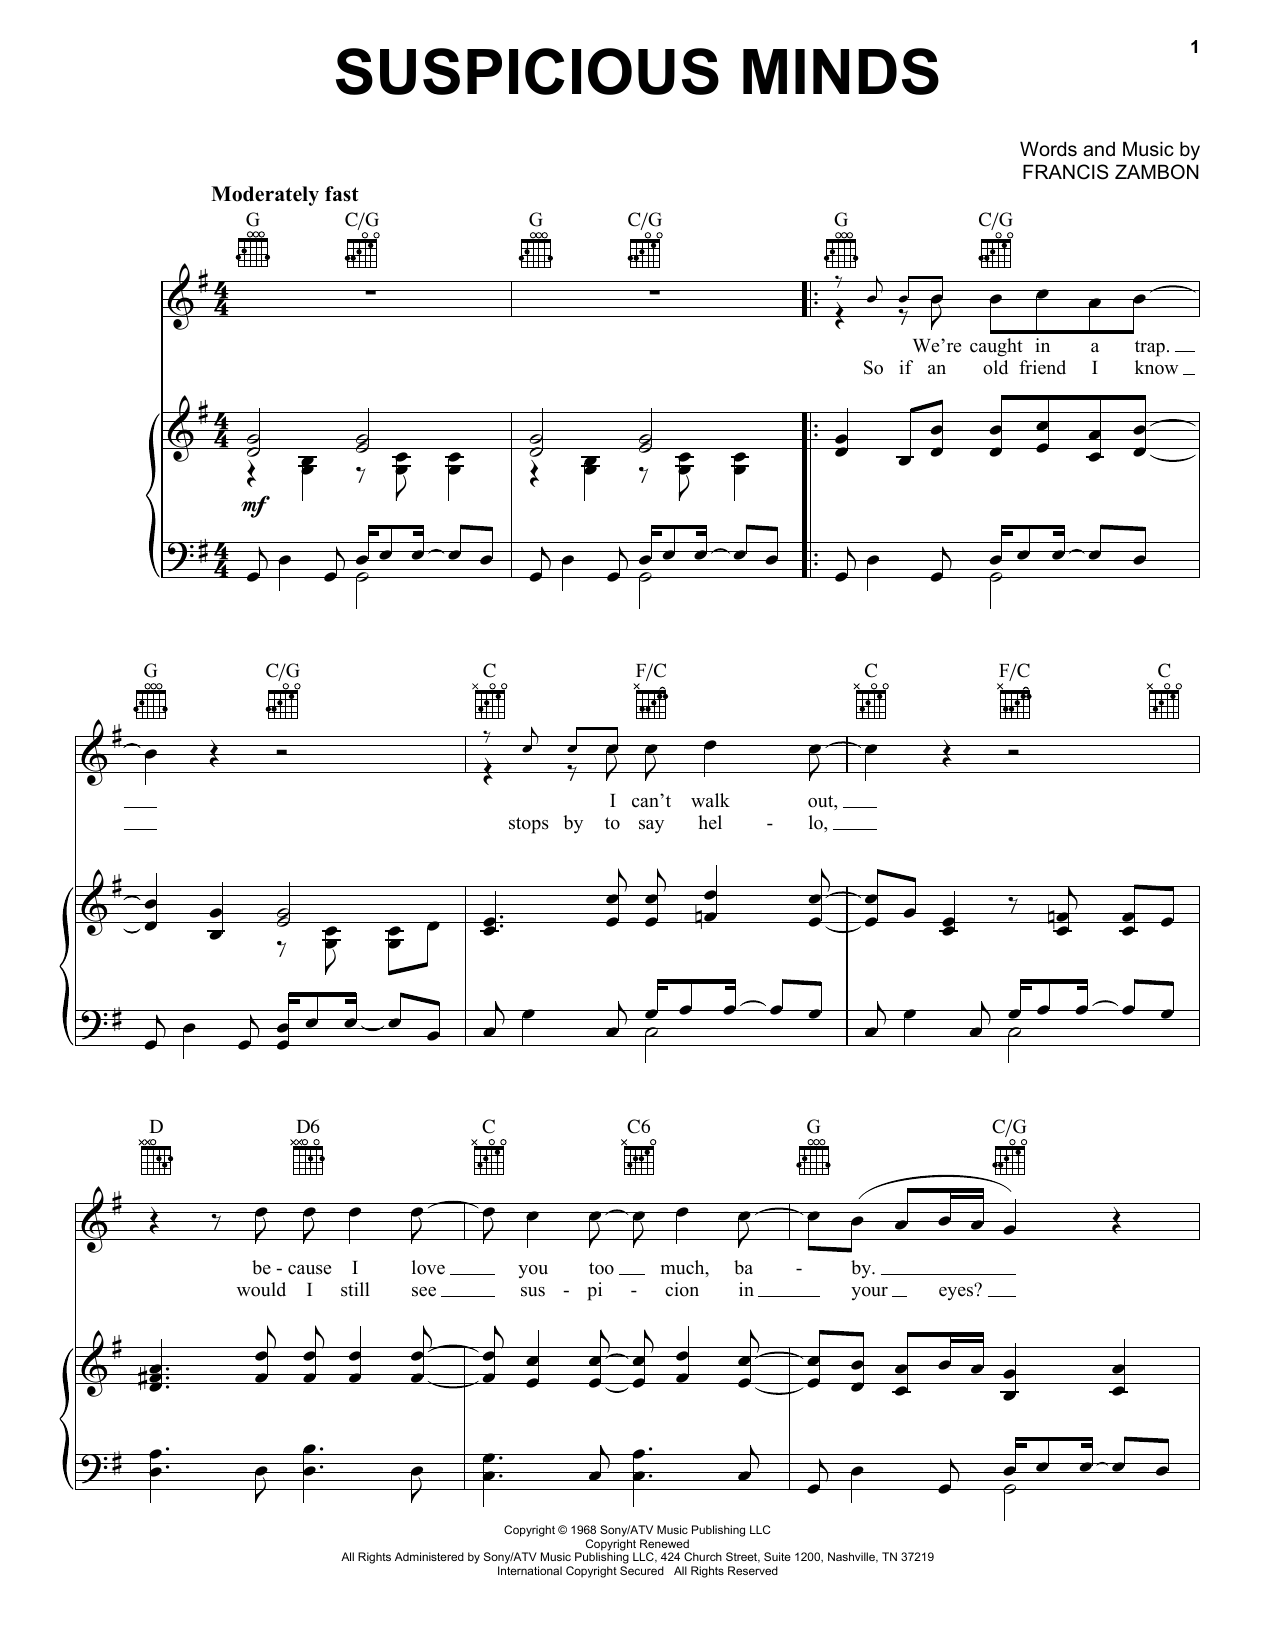 Elvis Presley Suspicious Minds sheet music notes and chords. Download Printable PDF.